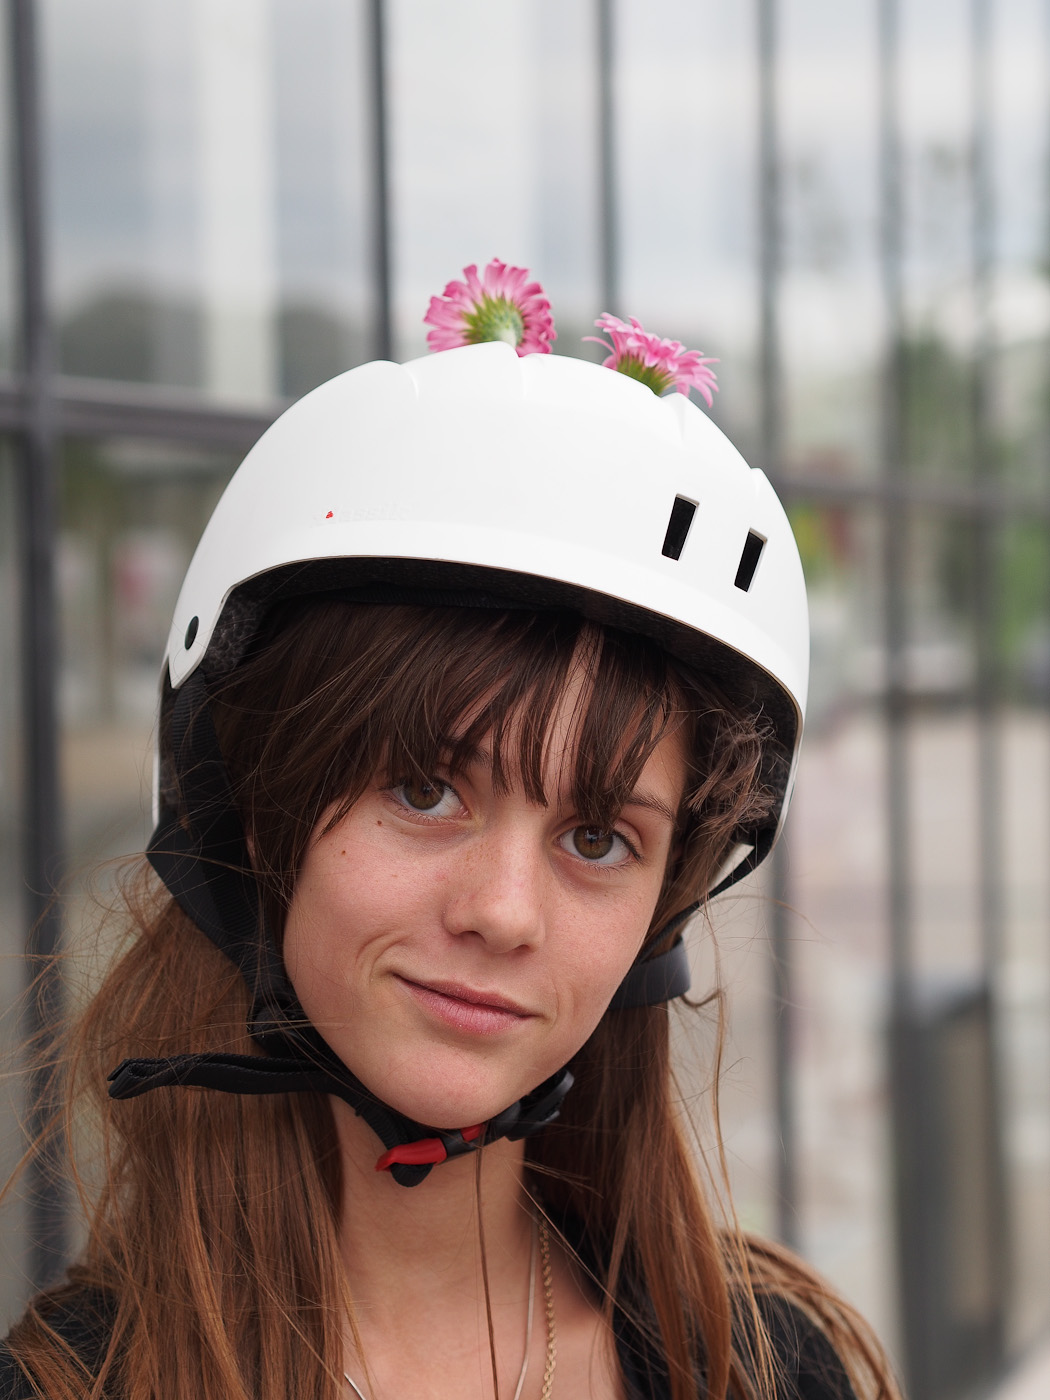 A young rollerskater girl has flowers sticking out of her helmet. Olympus OM-D E-M5 & Olympus Digital Zuiko 45mm f1.8